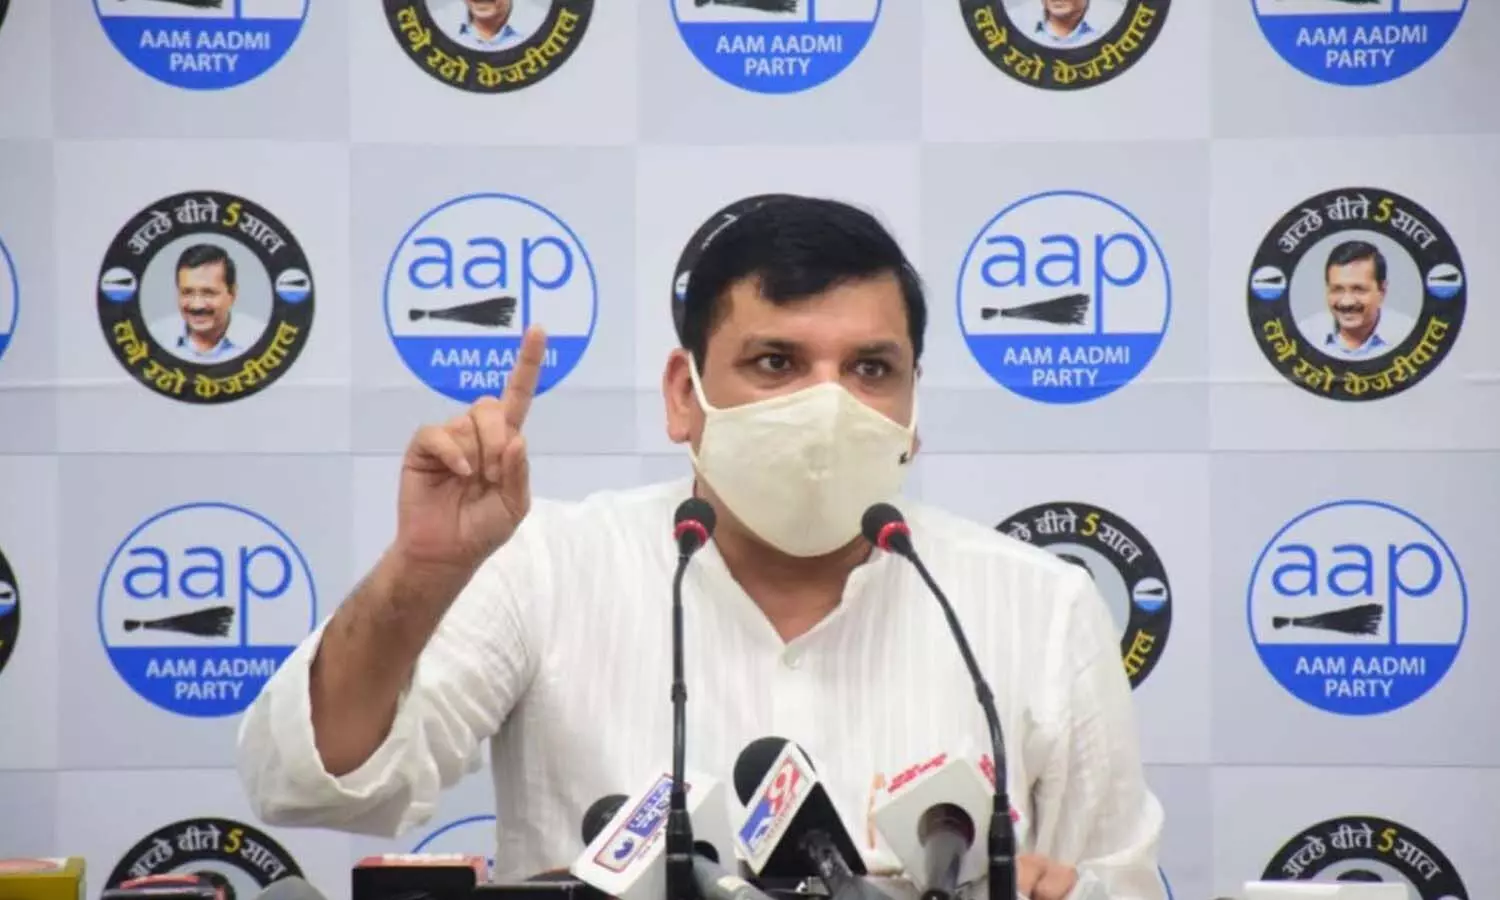 Aam Aadmi Party leader and UP in-charge Sanjay Singh press conference on ram mandi ghotala